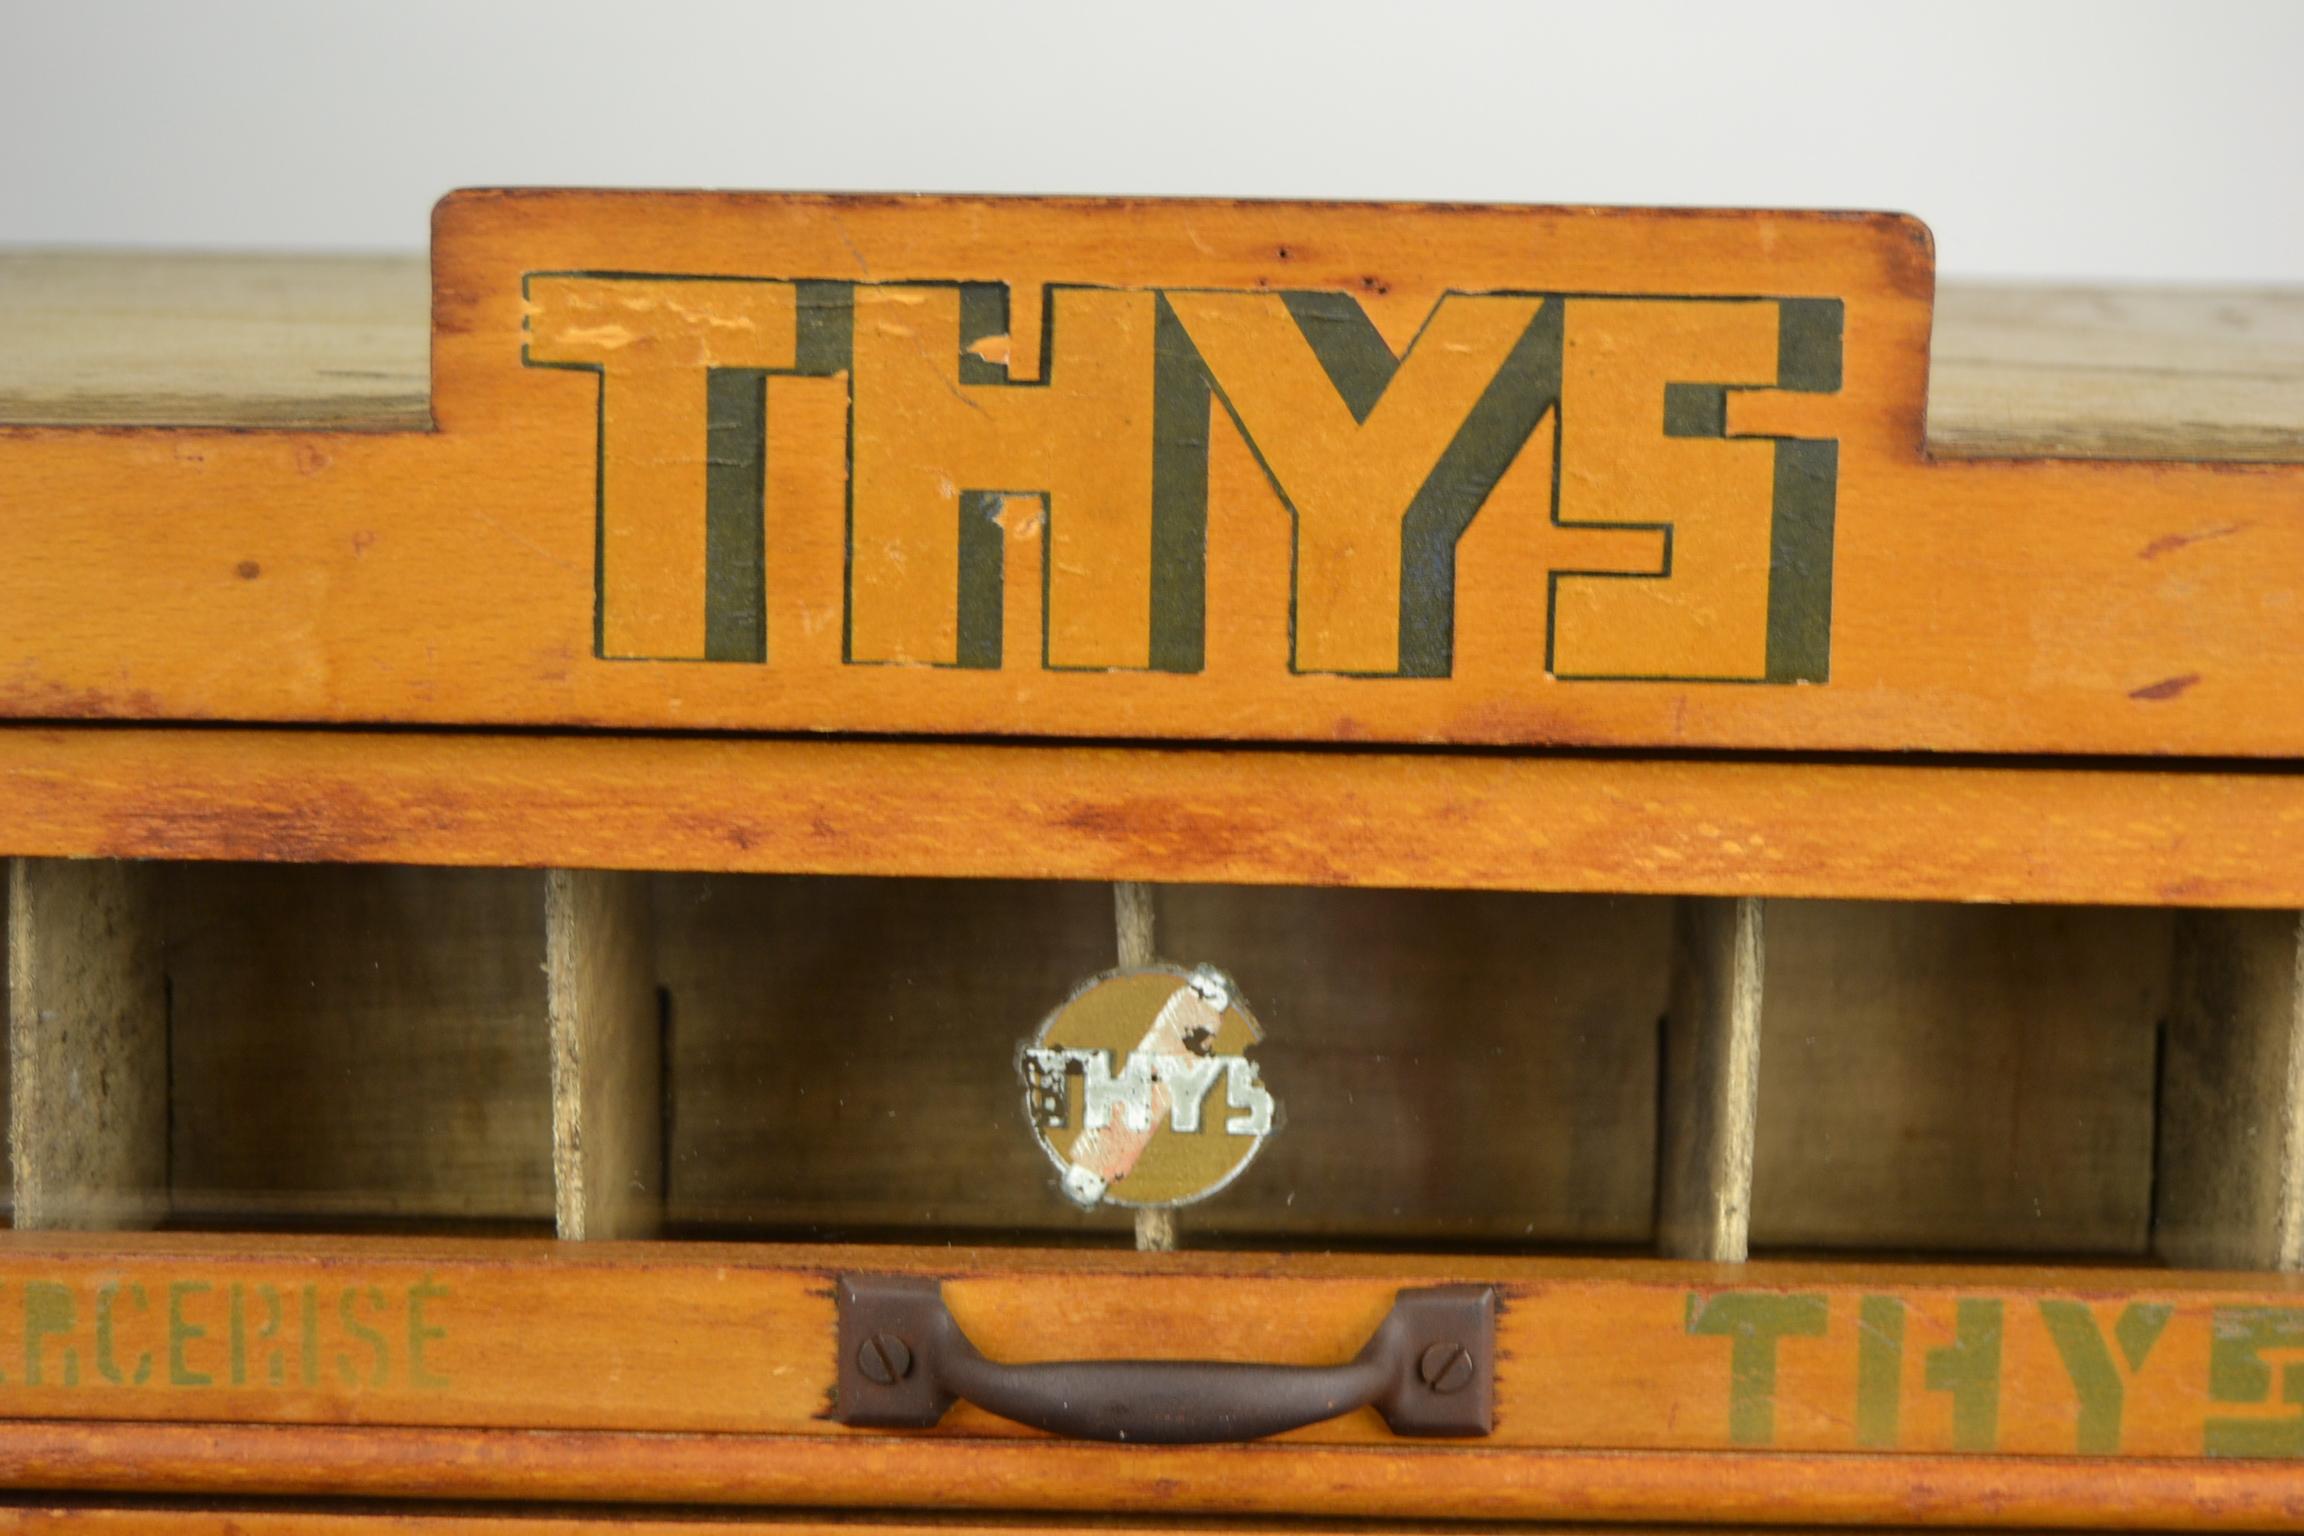 Vintage Haberdashery advertising cabinet for sewing thread brand Thys Belgium.
This storage cabinet for sewing material has 4 drawers with the original metal handles.
Wooden partition is partly present in the drawers - one glass has once been